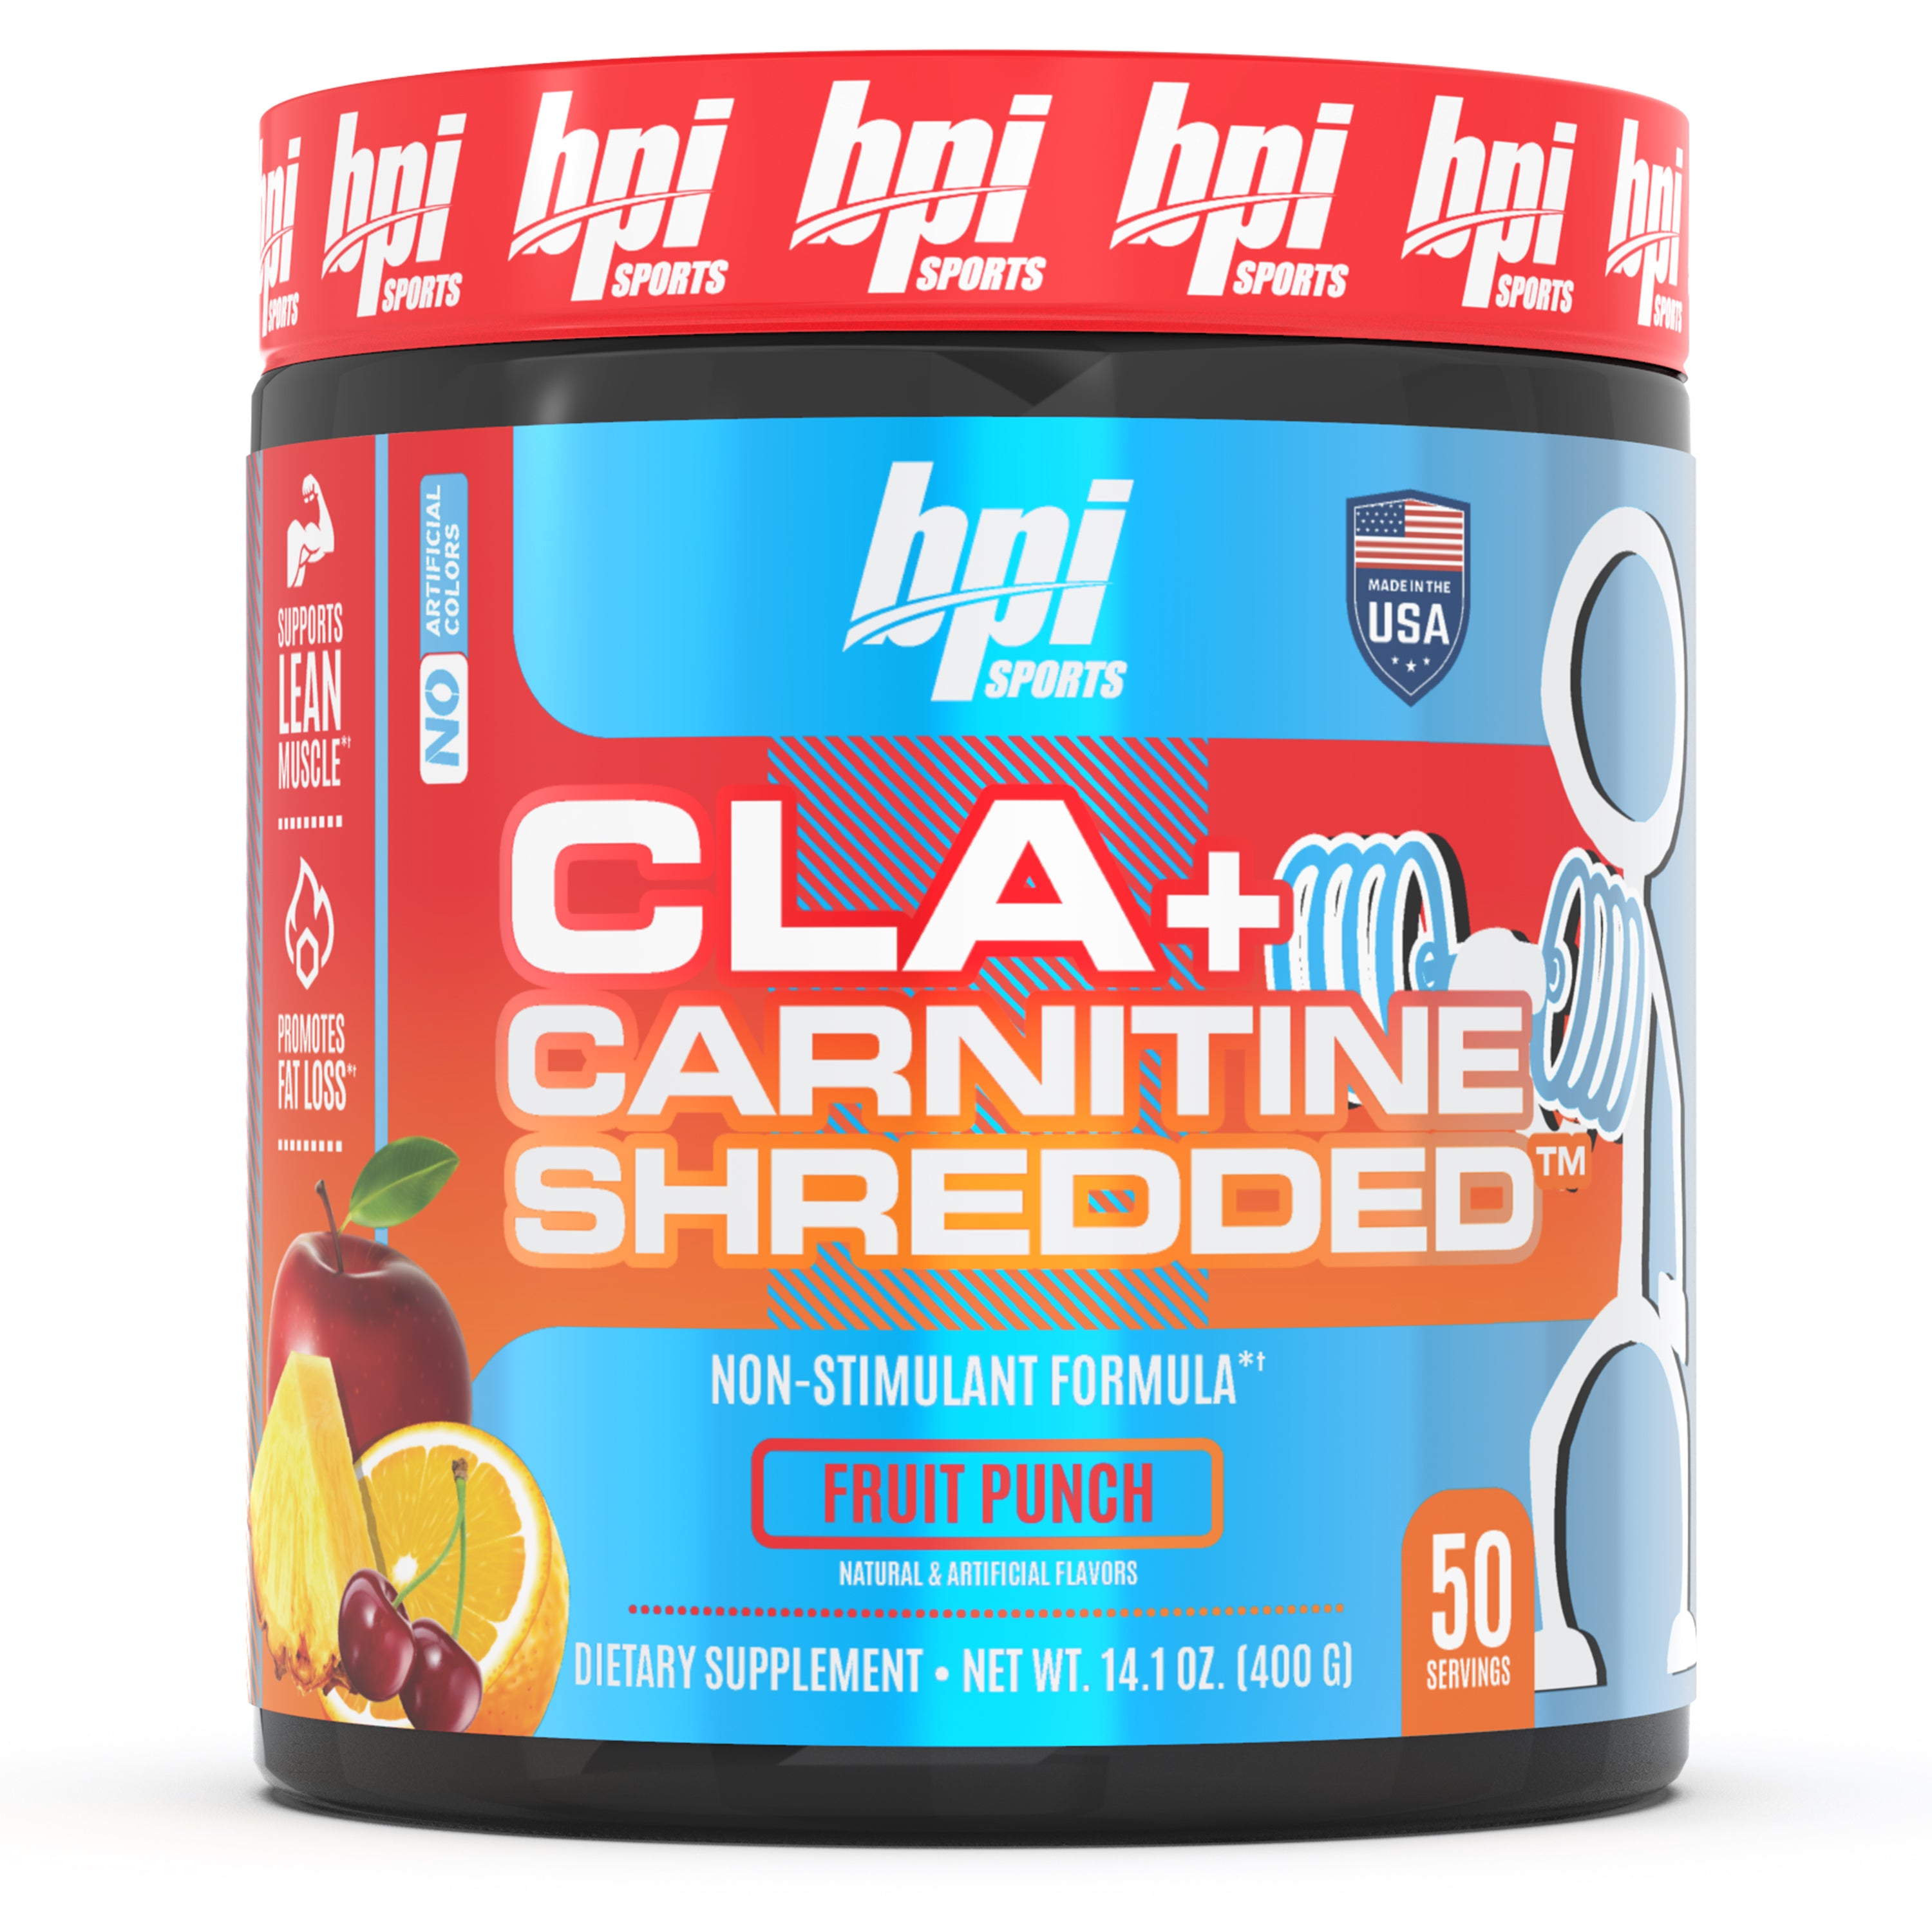 CLA + Carnitine Shredded™ - Weight Loss and Natural Energy